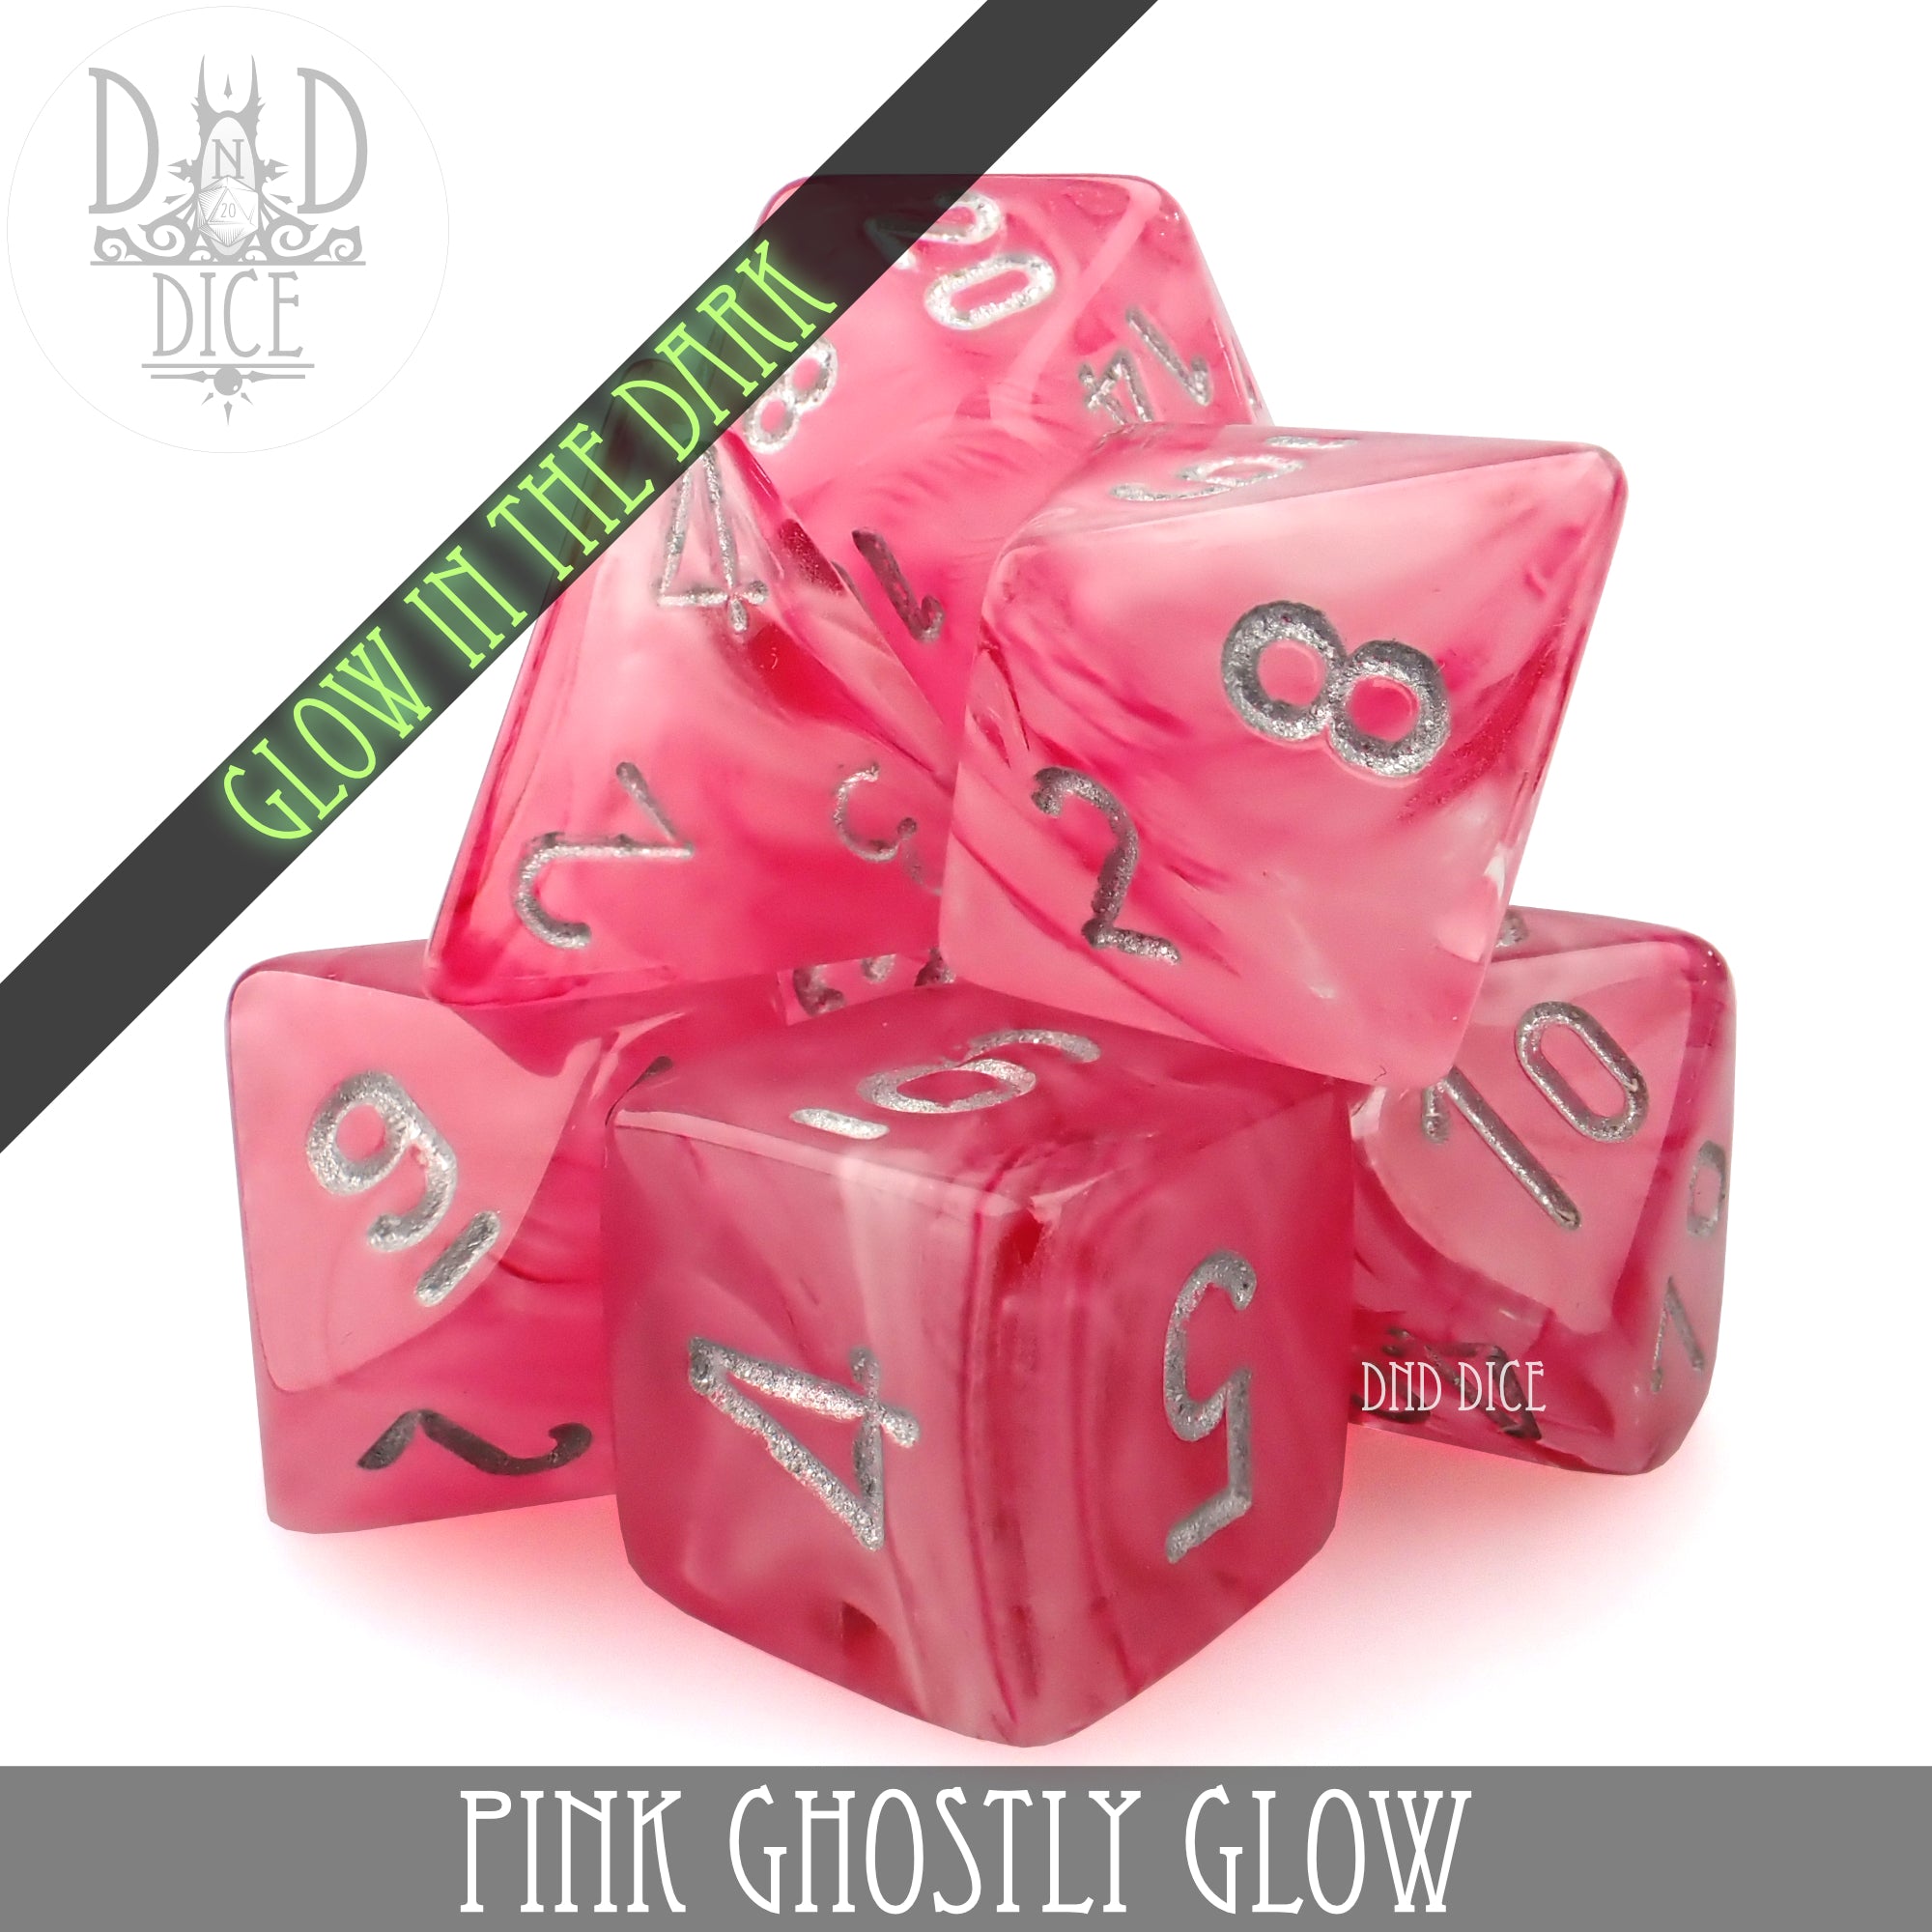 Pink Ghostly Glow Dice Set